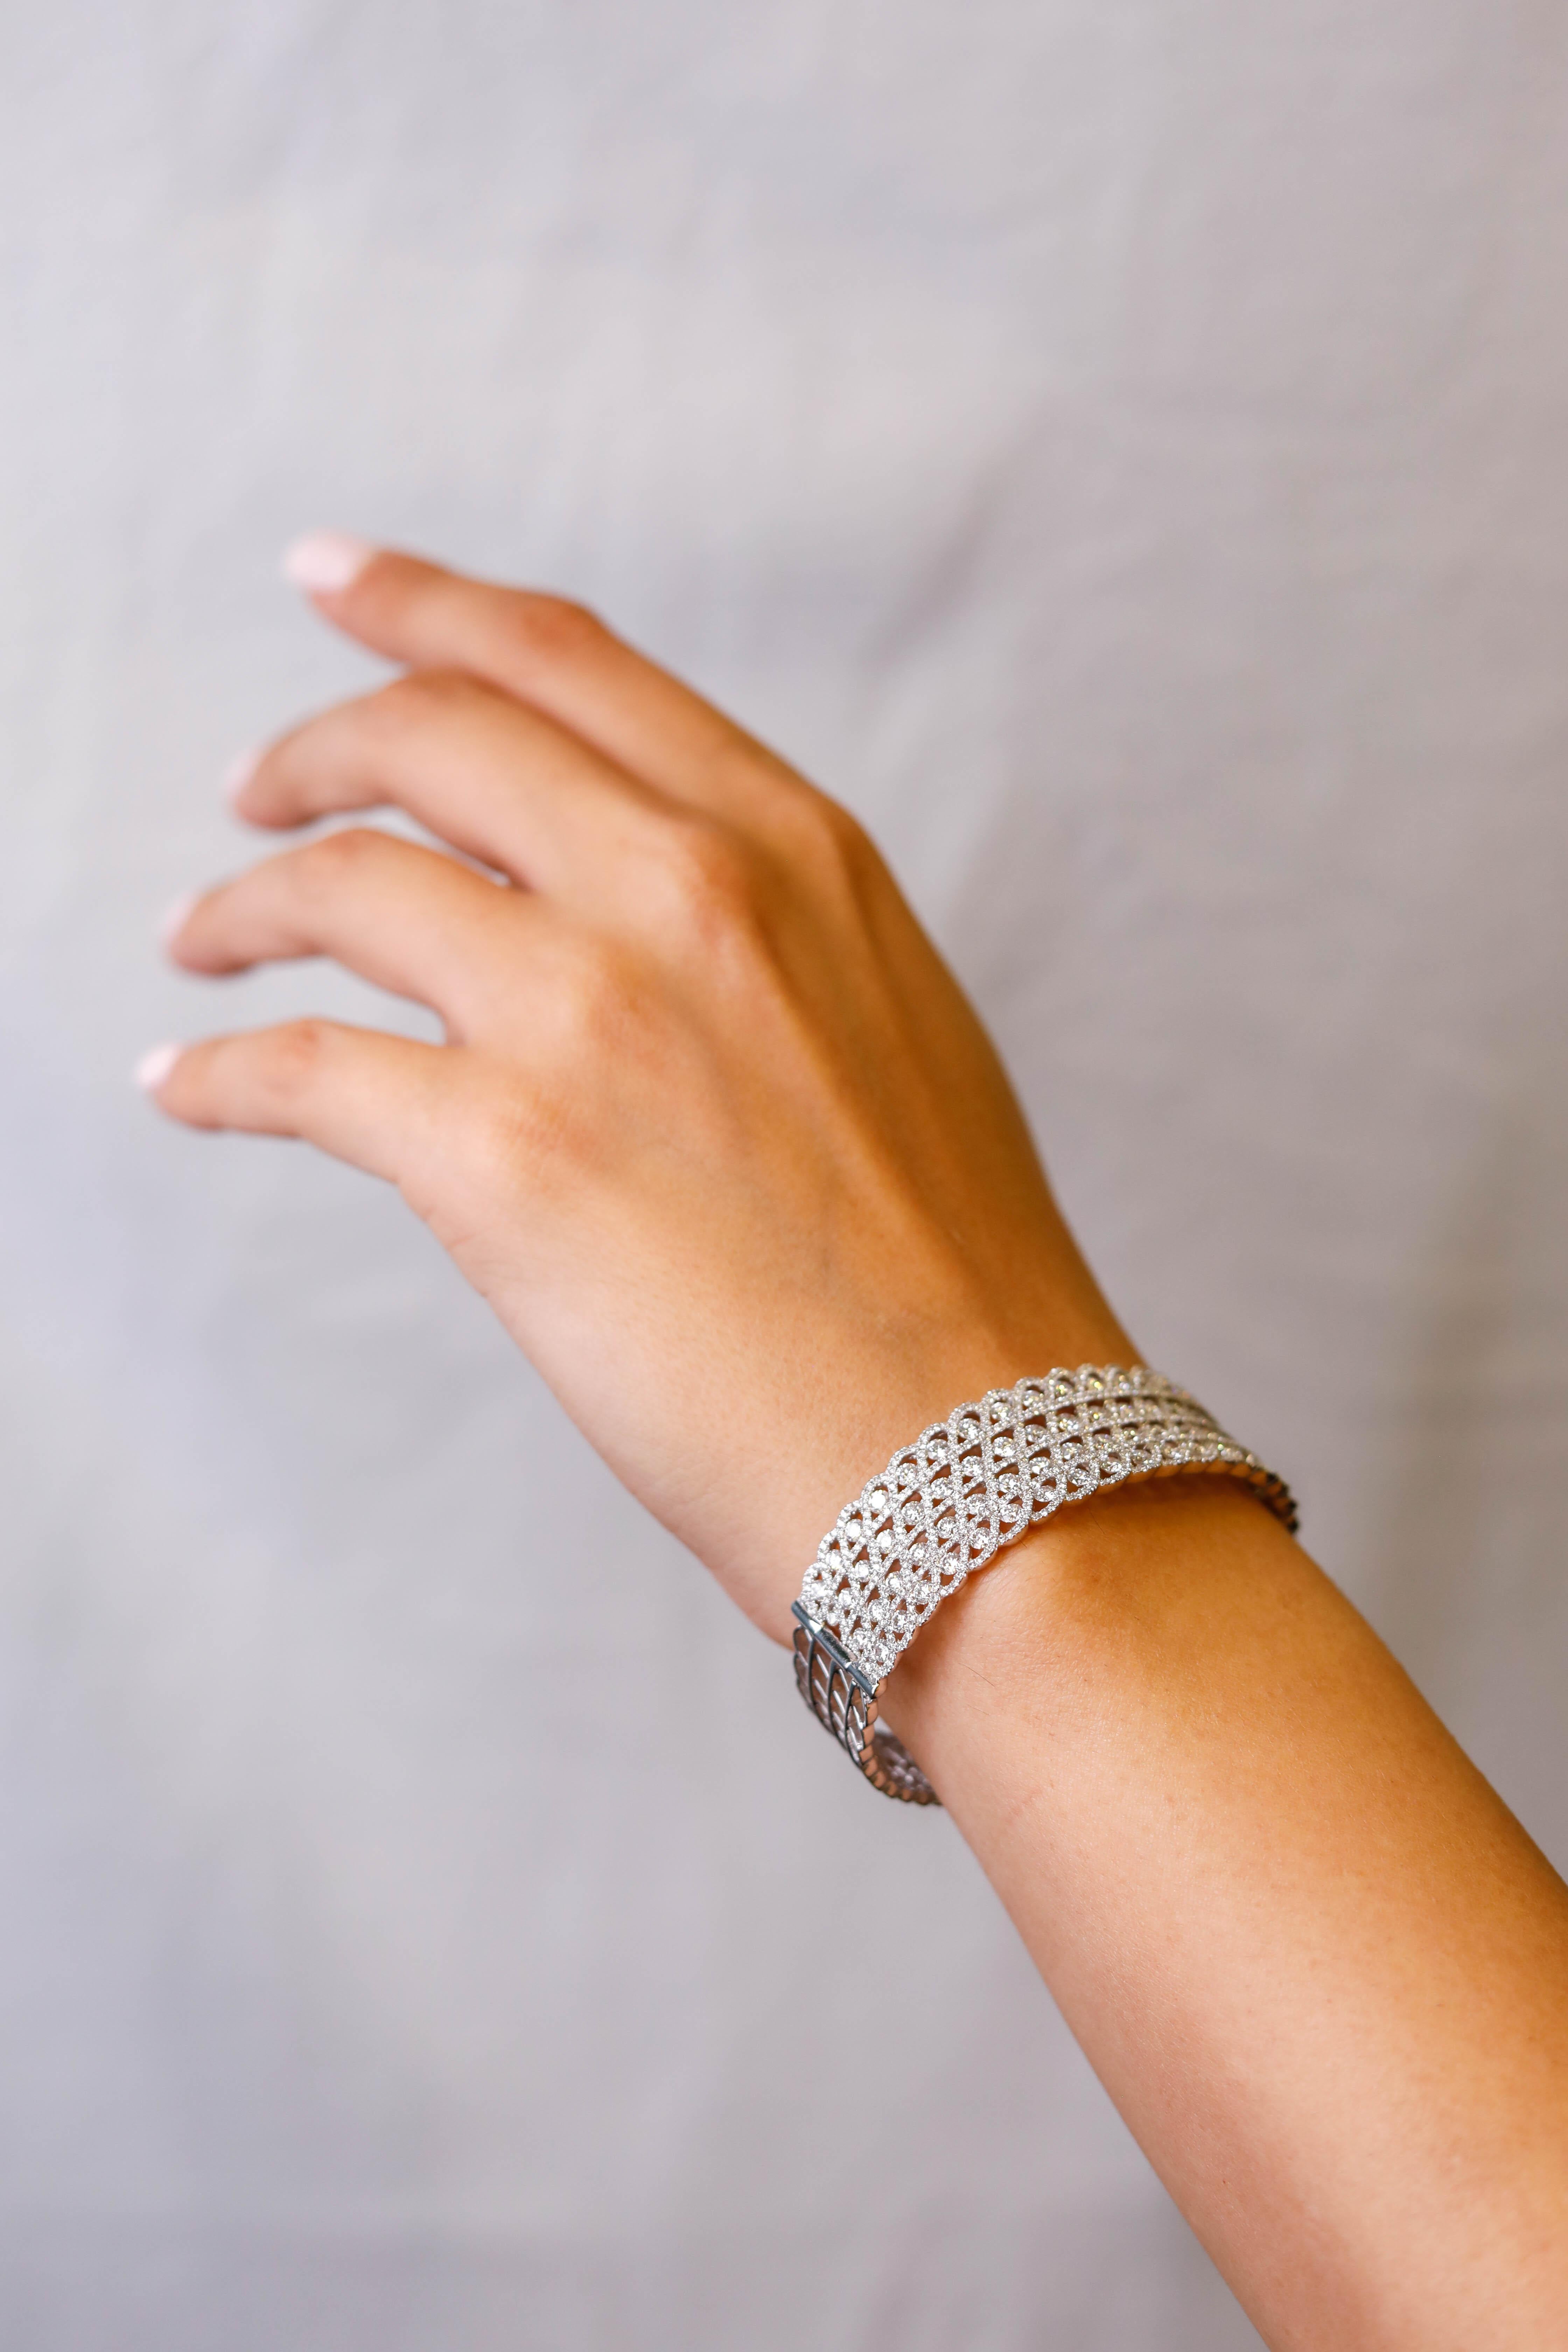 9.39 Carat White Diamond 18 Karat White Gold Cuff Bracelet Fine Jewelry

Charming Diamond Cuff Bracelet featuring the finest round gleaming diamonds, interlinked throughout the intricate design. This fine creation, polished to a brilliant shine,